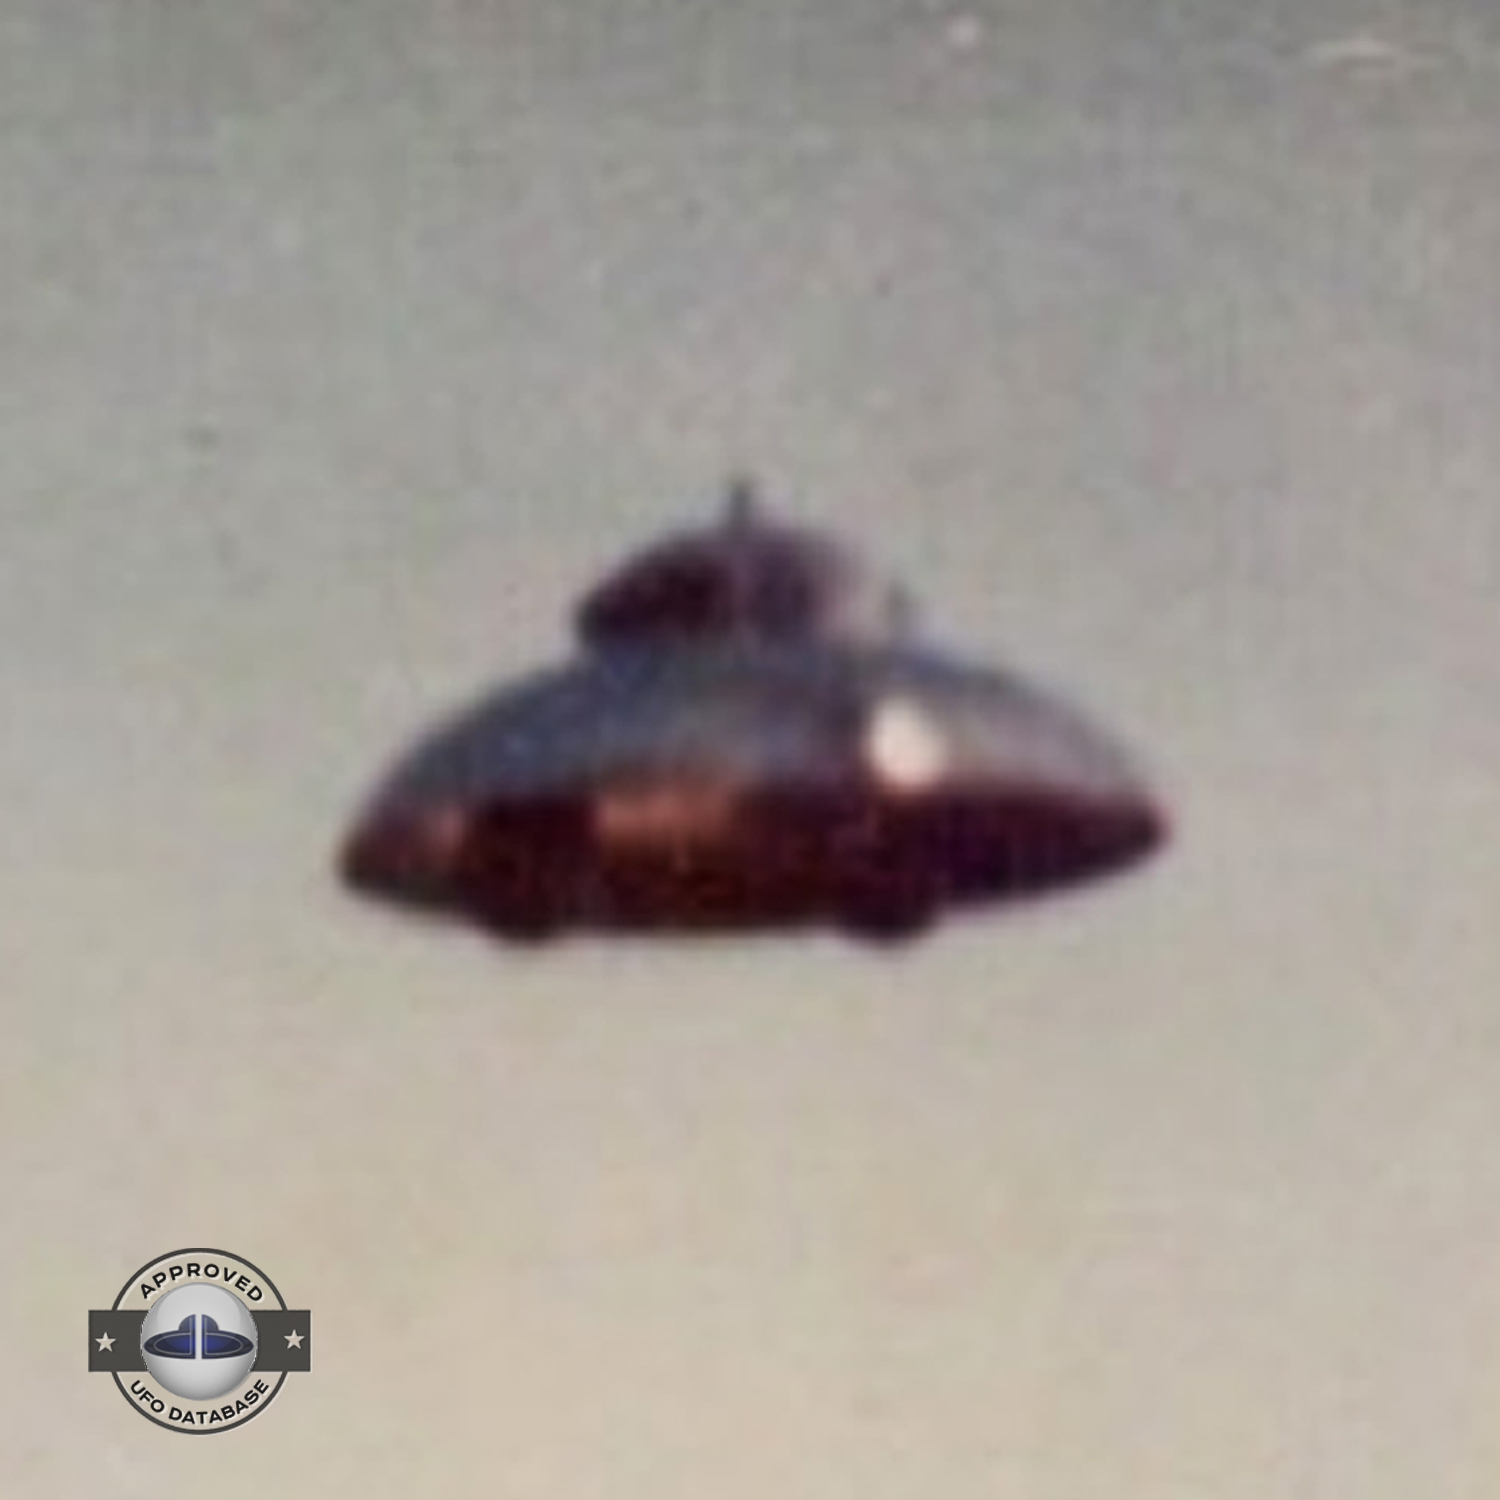 This UFO picture has been in several reports and controversies, 1970s UFO Picture #138-5